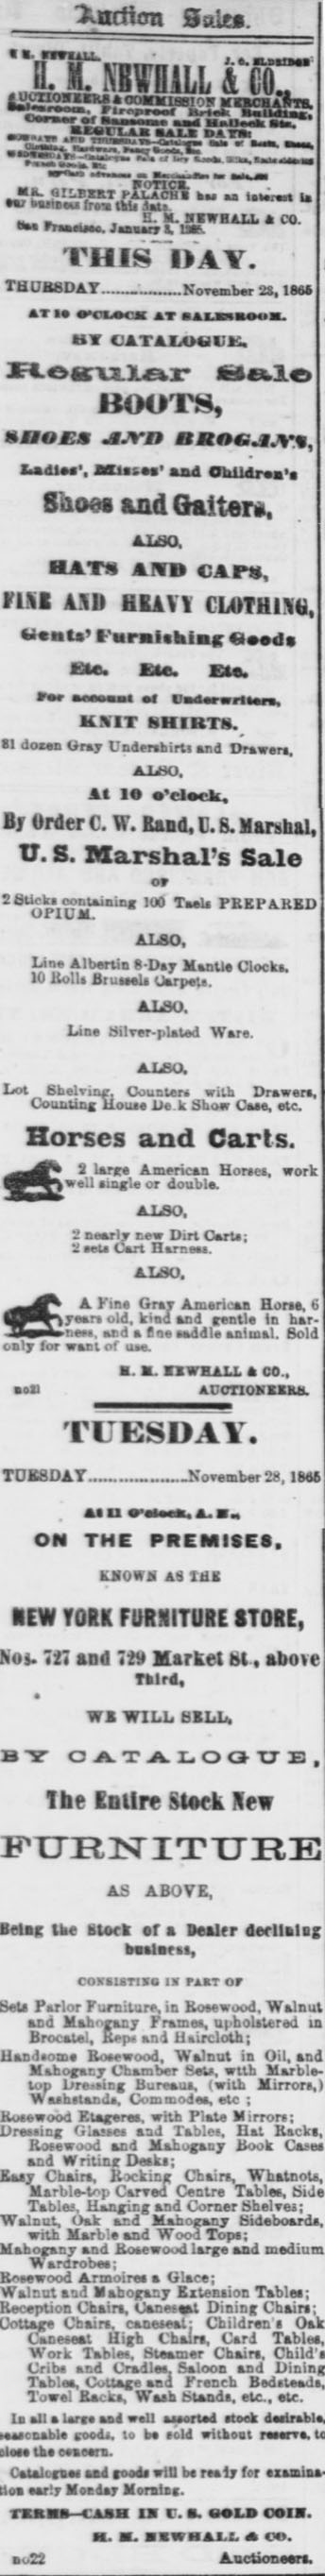 Auction Sales Newhall, November 23, 1856, Daily Alta California Ad.